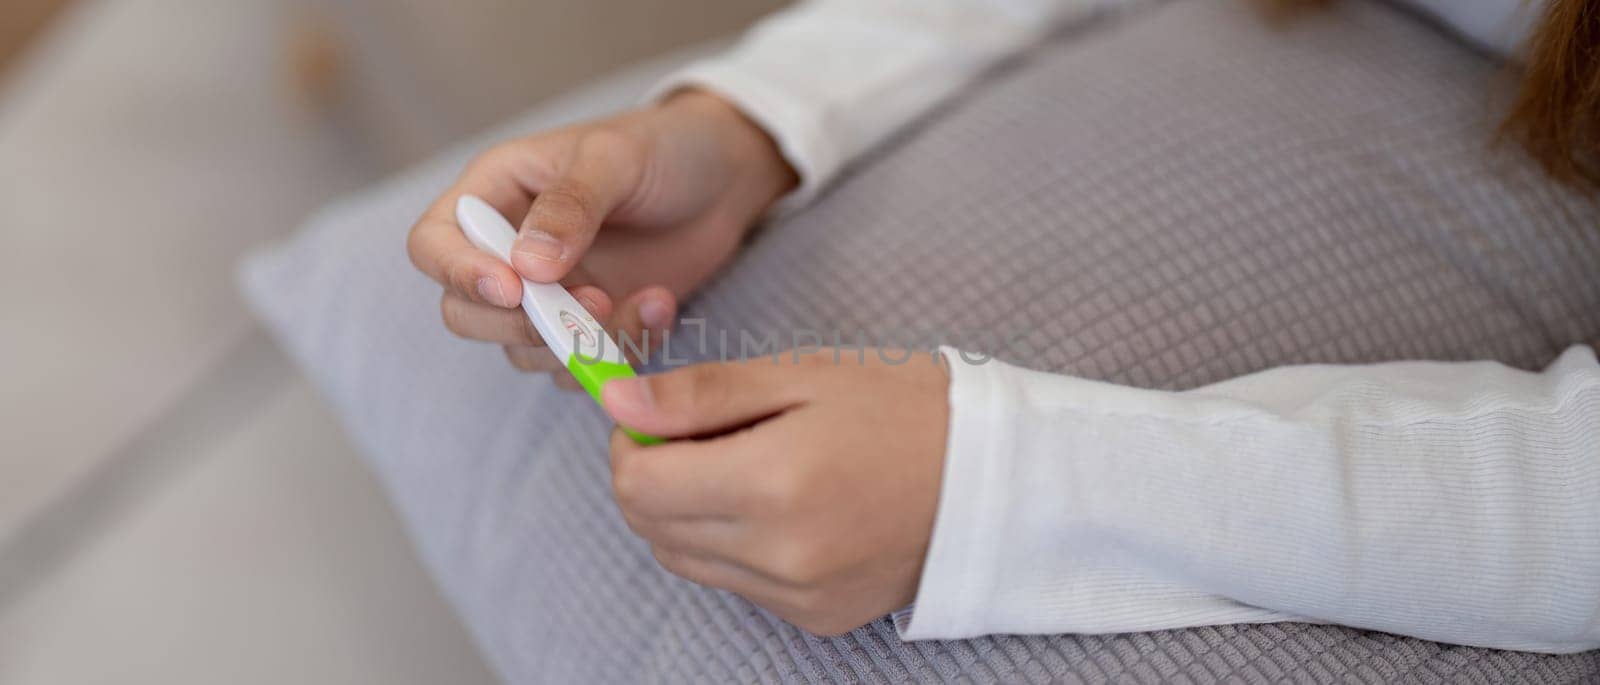 Woman examining pregnancy test results with concern. Concept of personal health, anxiety, and reproductive issues.